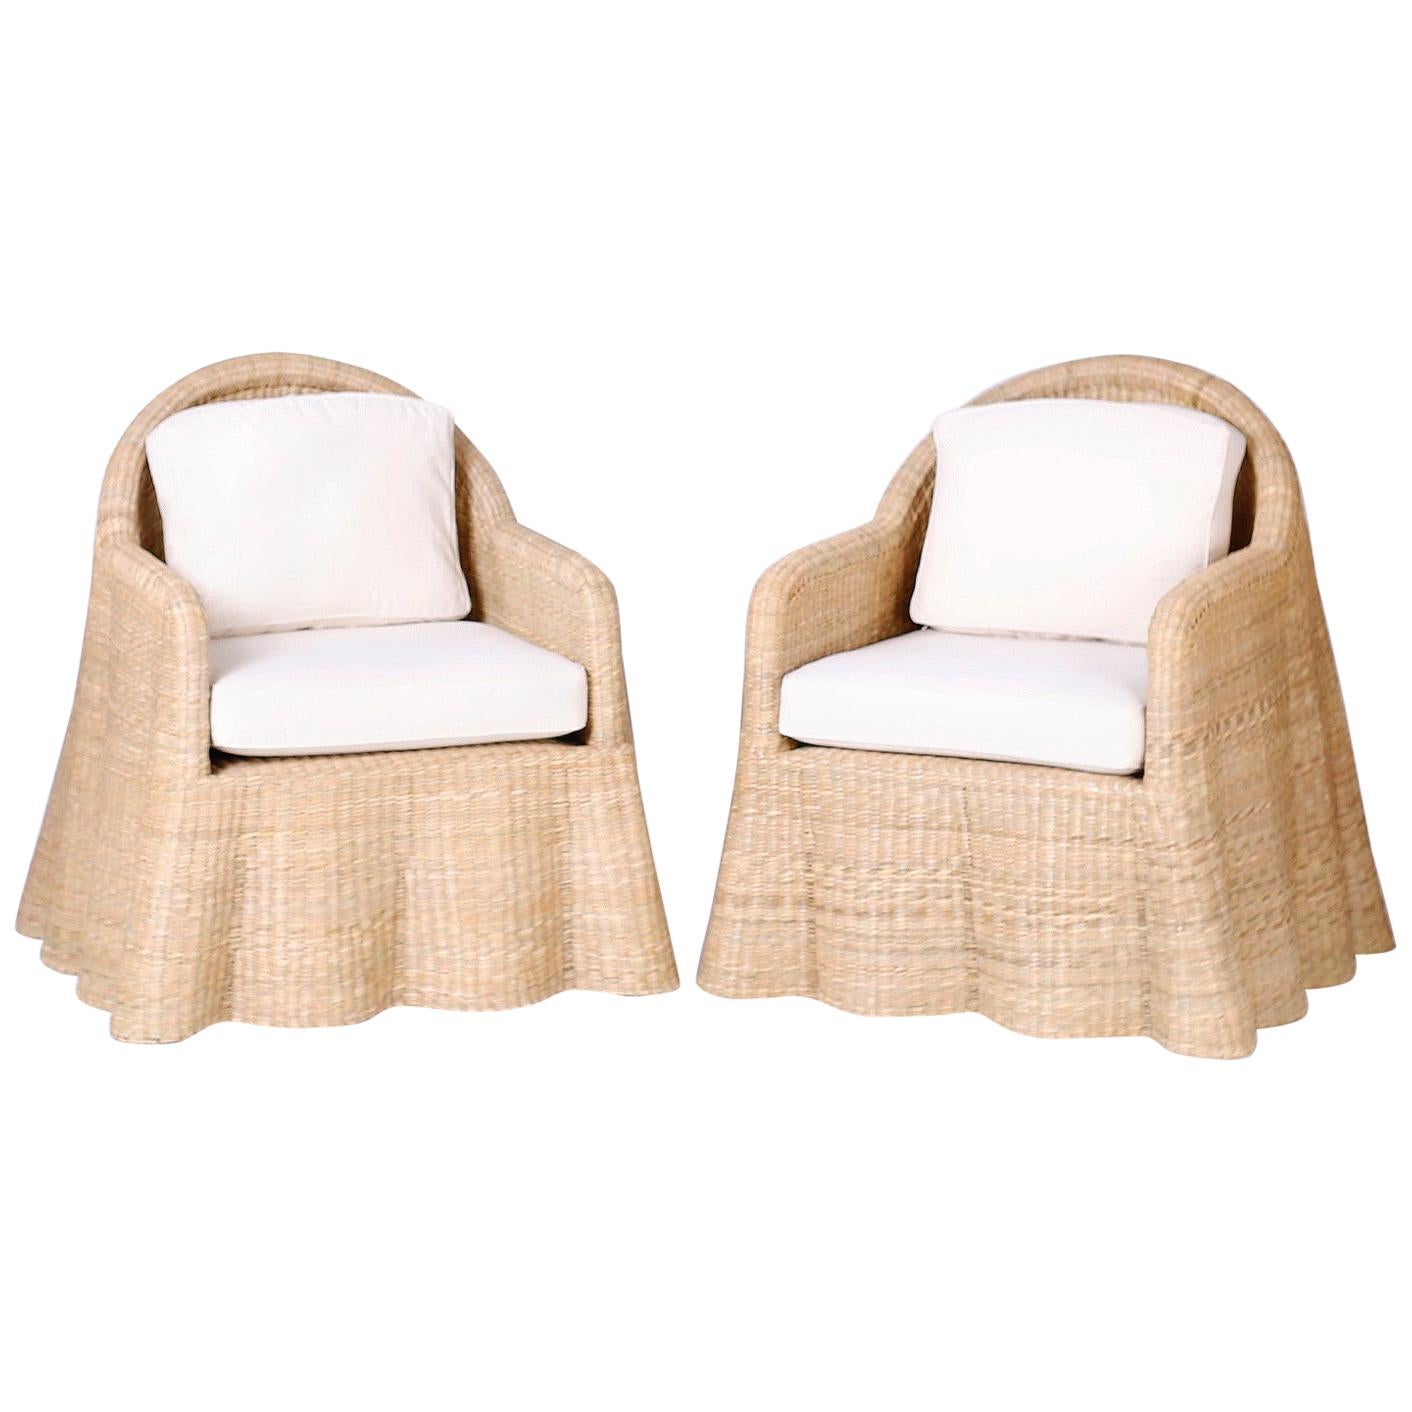 Wicker Drapery Ghost Armchairs, Priced Individually